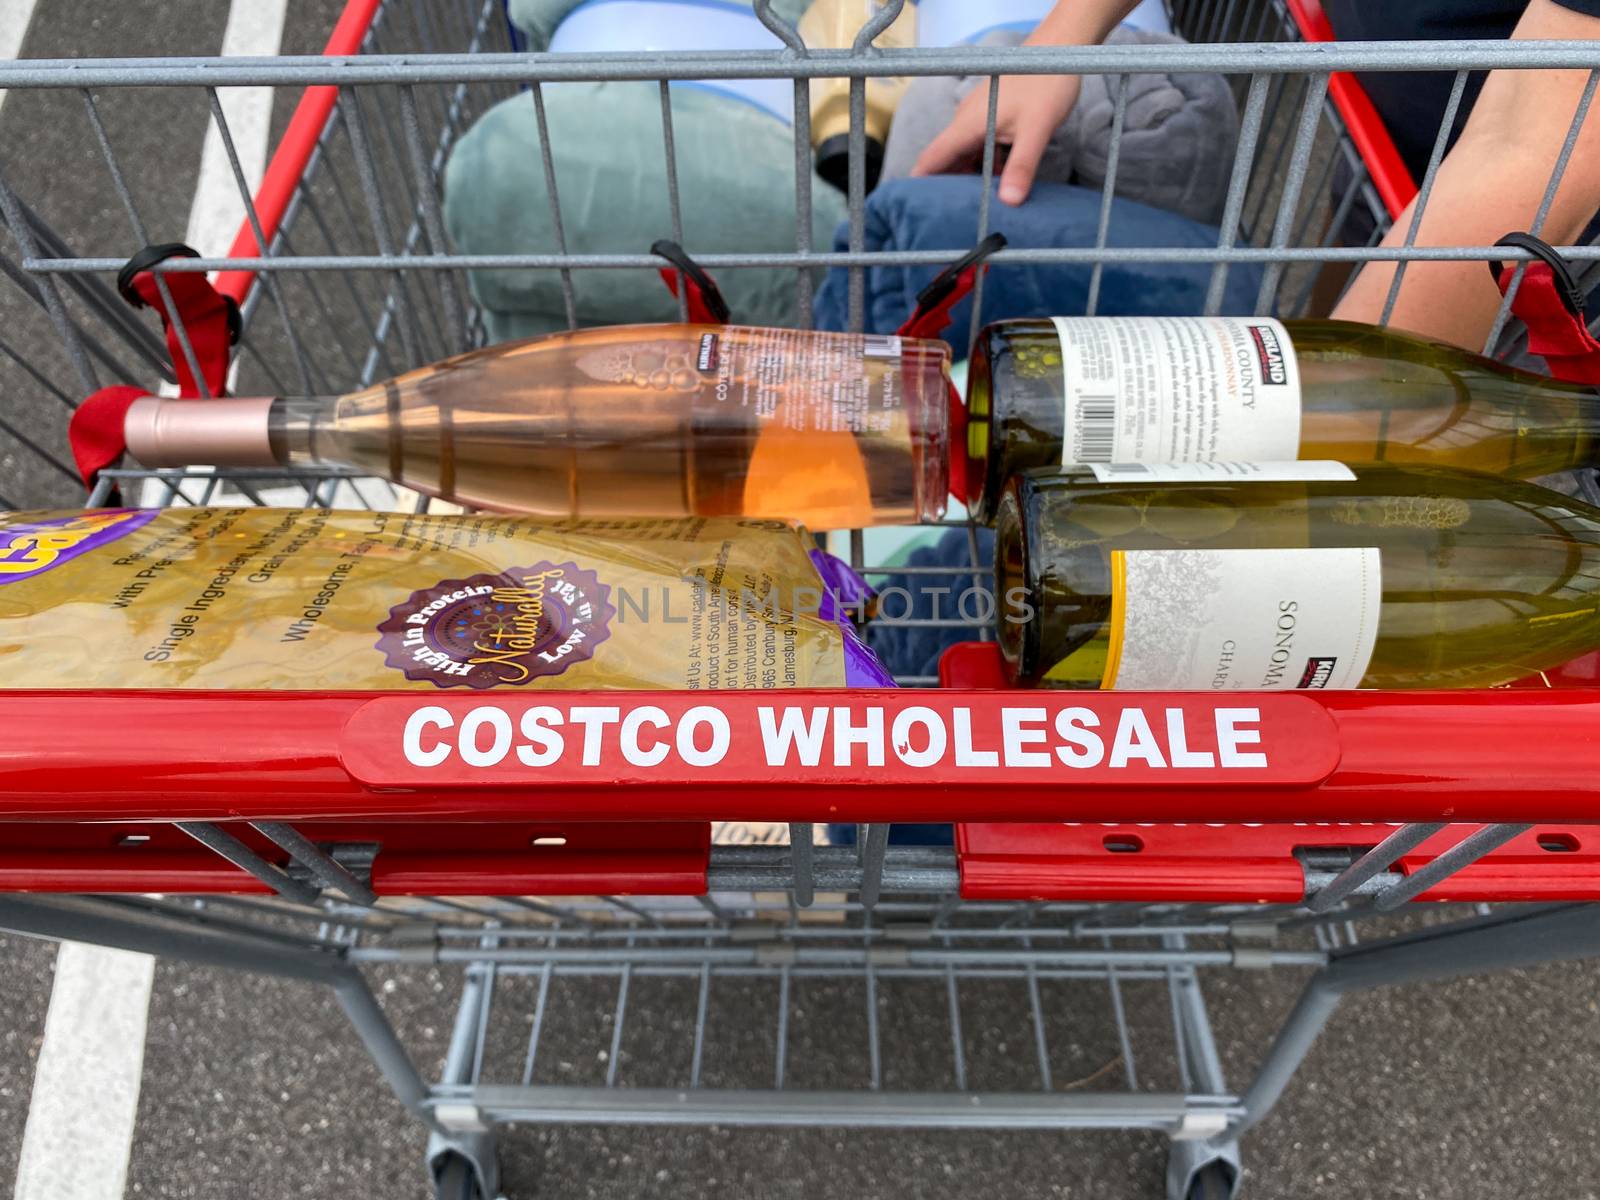 Orlando, FL/USA-11/1/20:  A shopping cart filled with purchases at a Costco Wholesale retail store in Orlando, Florida.